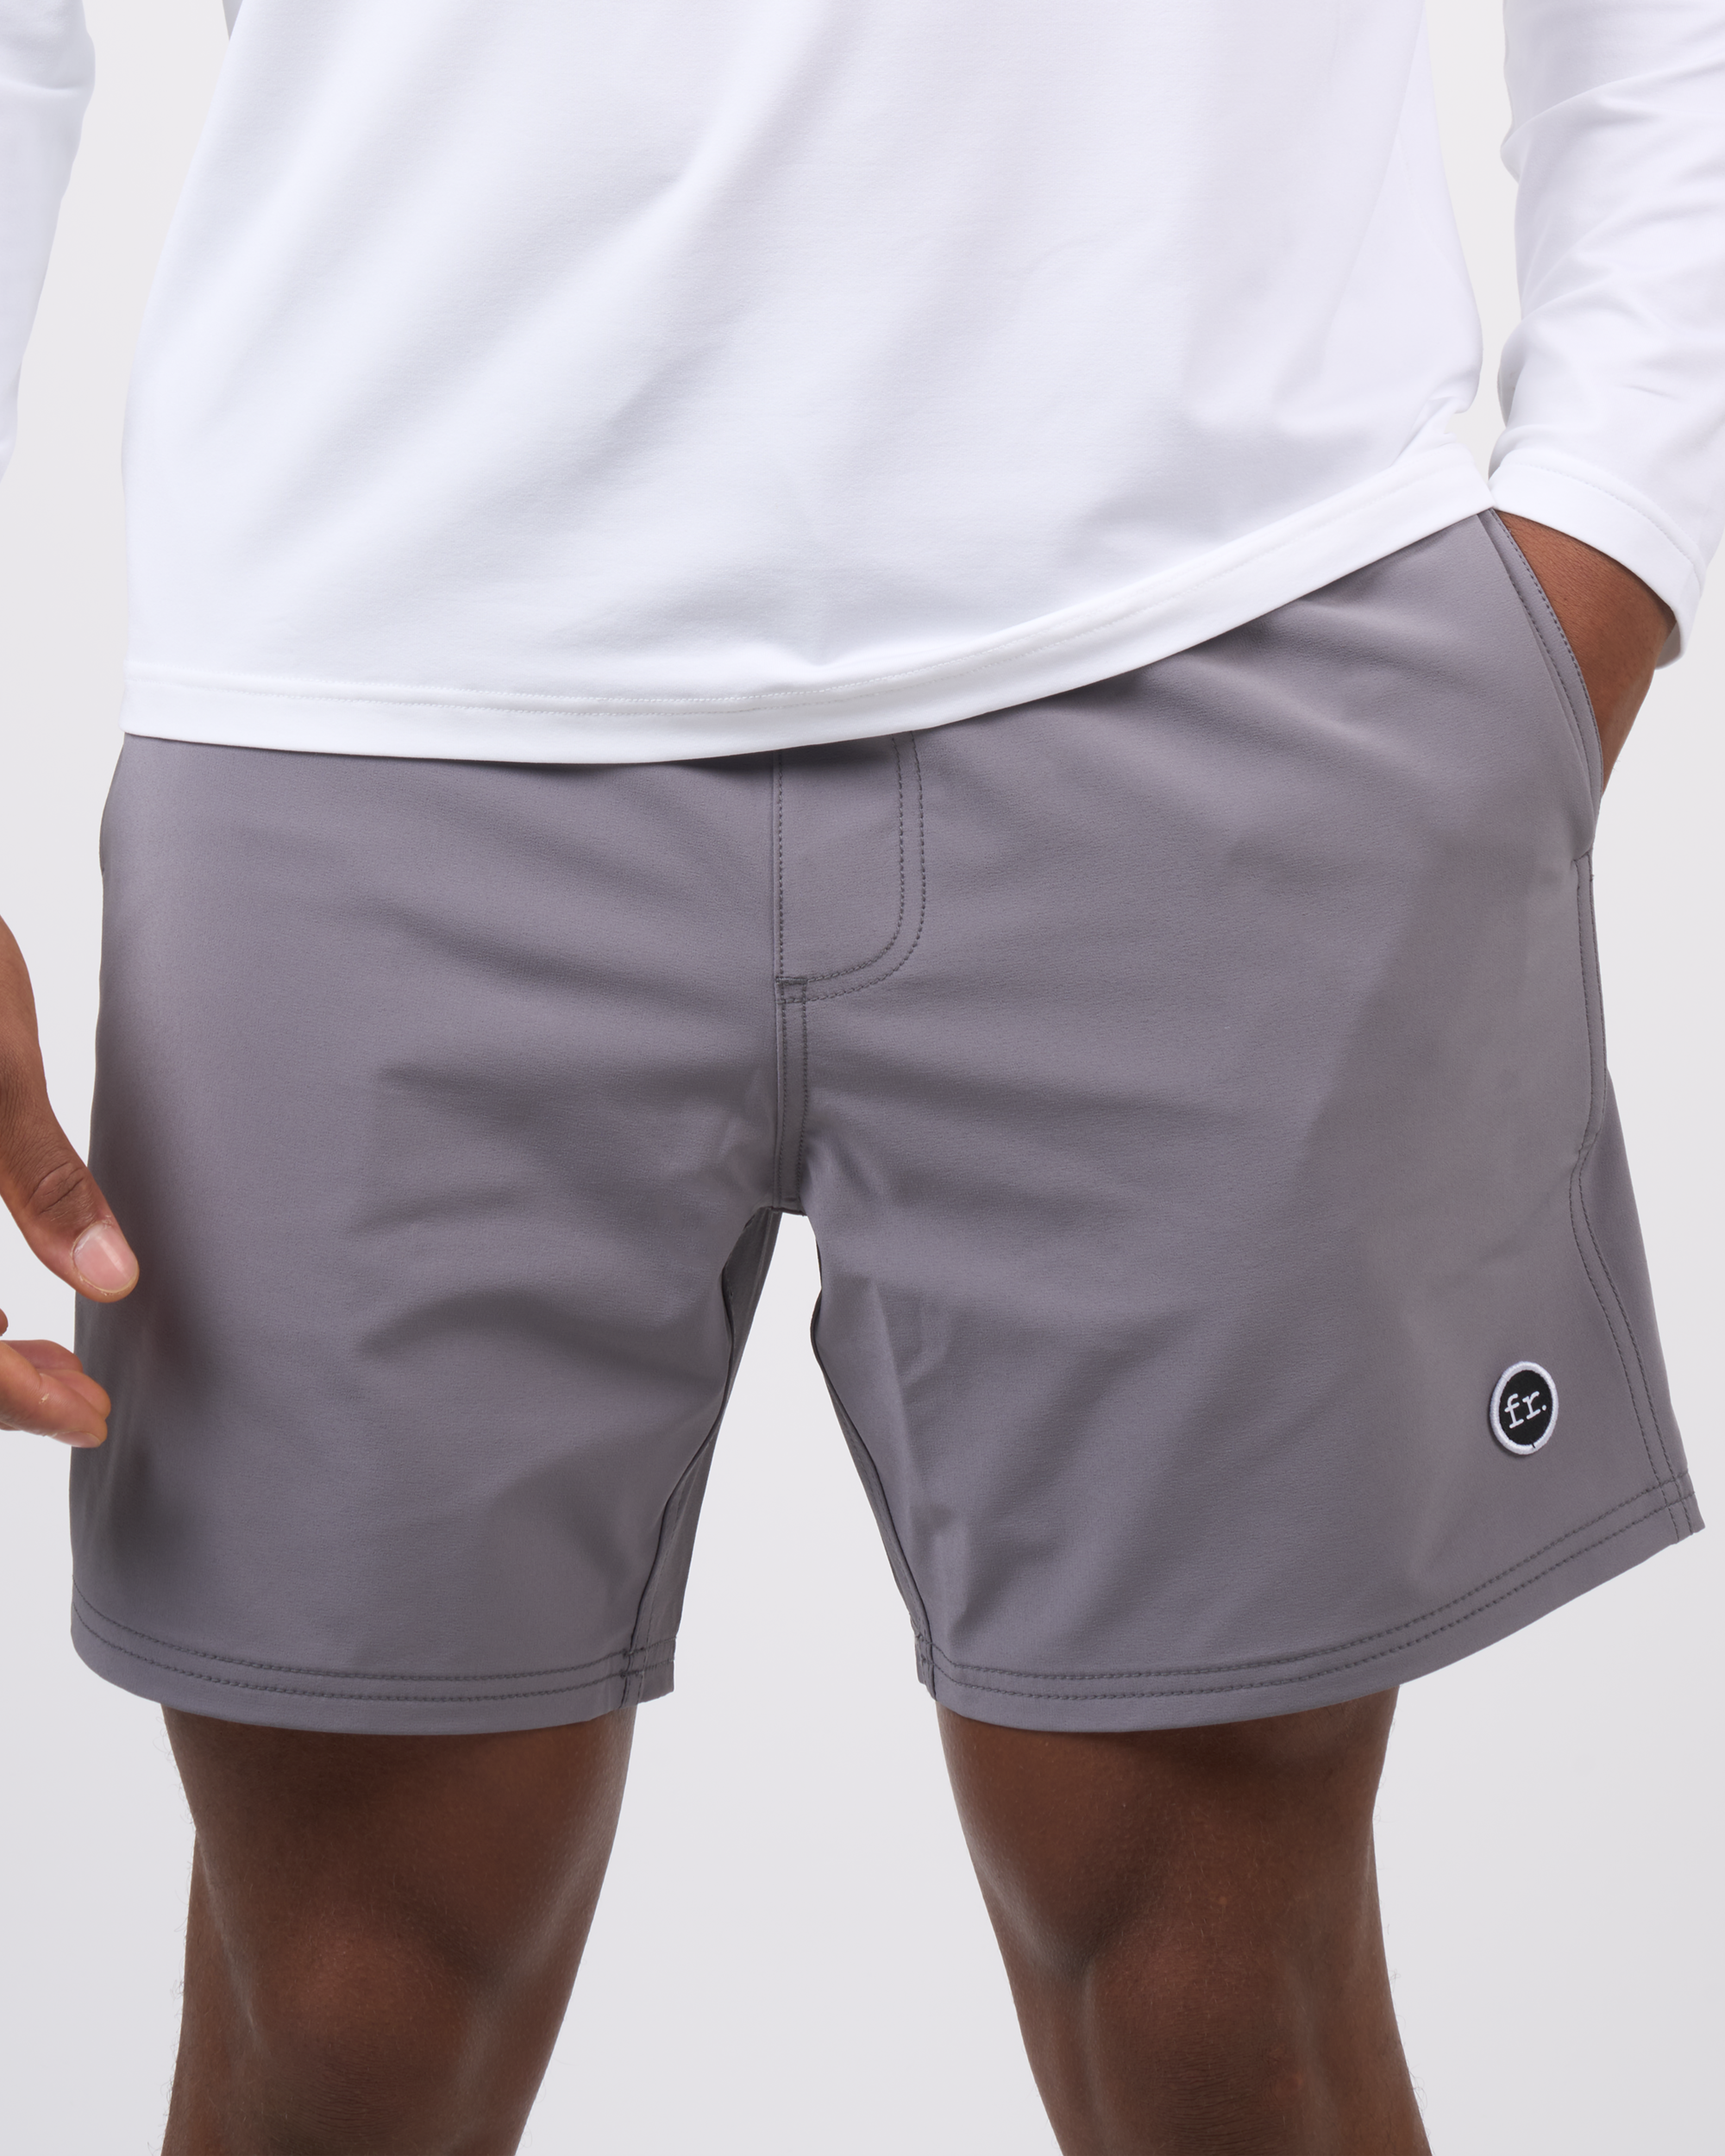 Foreign Rider Co Technical Fabric Grey Boardshorts Model Closeup Front Detail